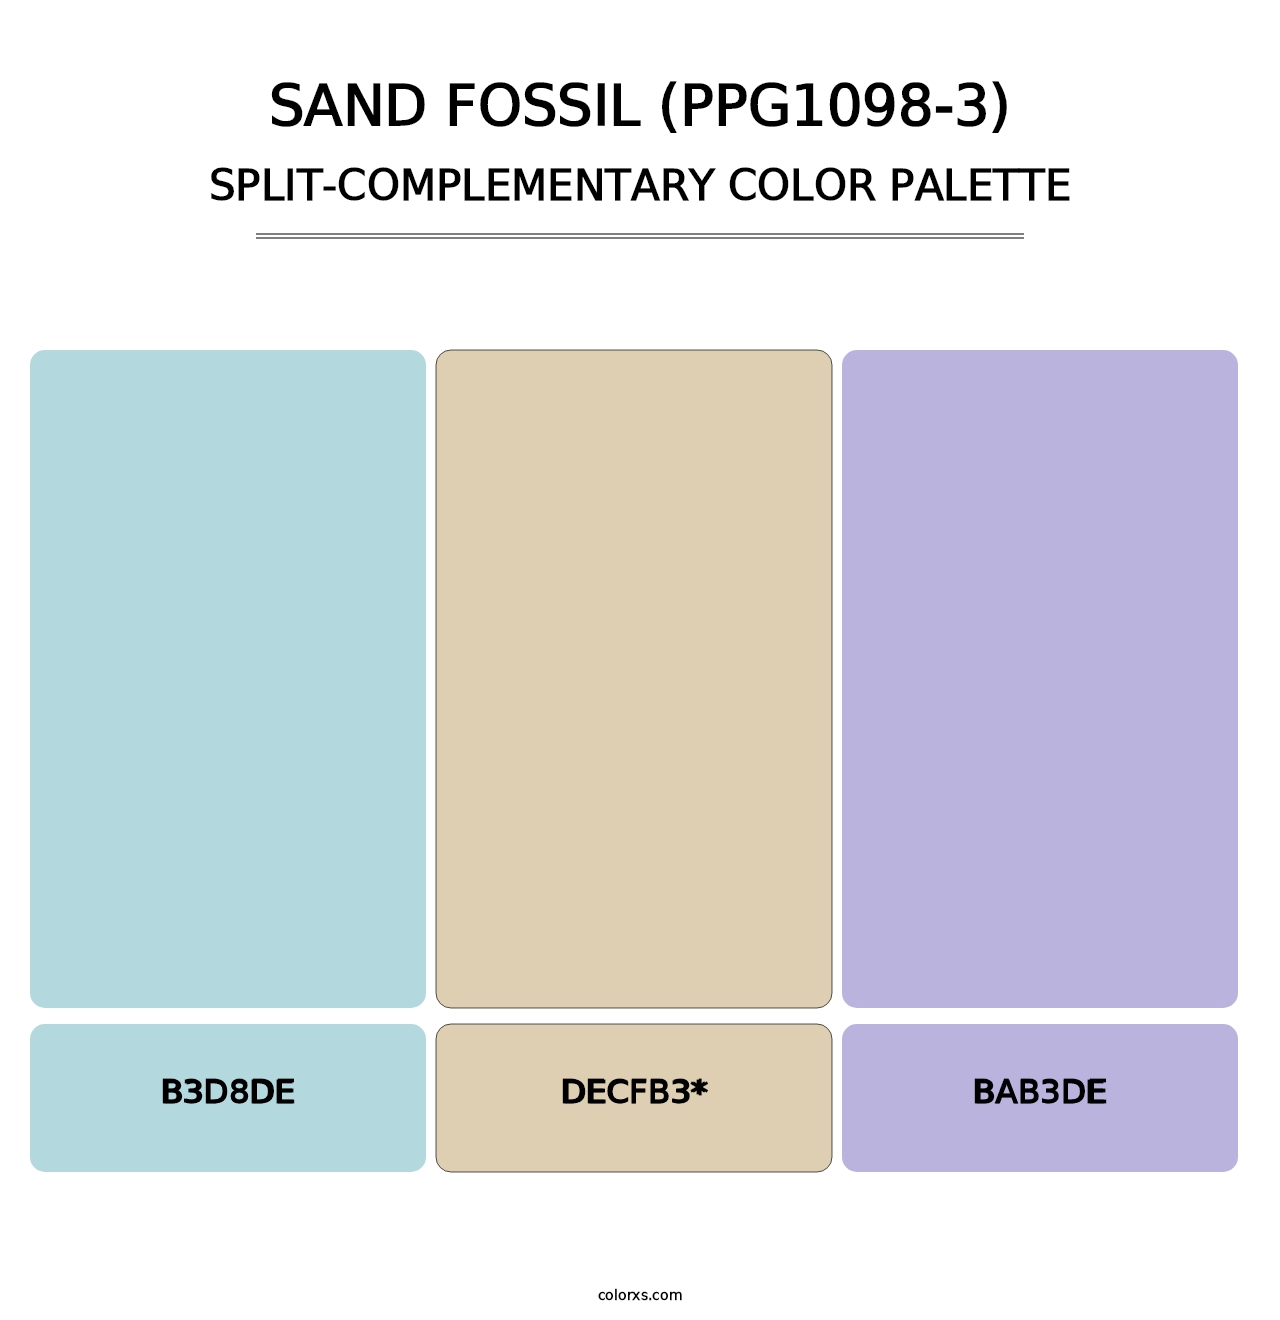 Sand Fossil (PPG1098-3) - Split-Complementary Color Palette